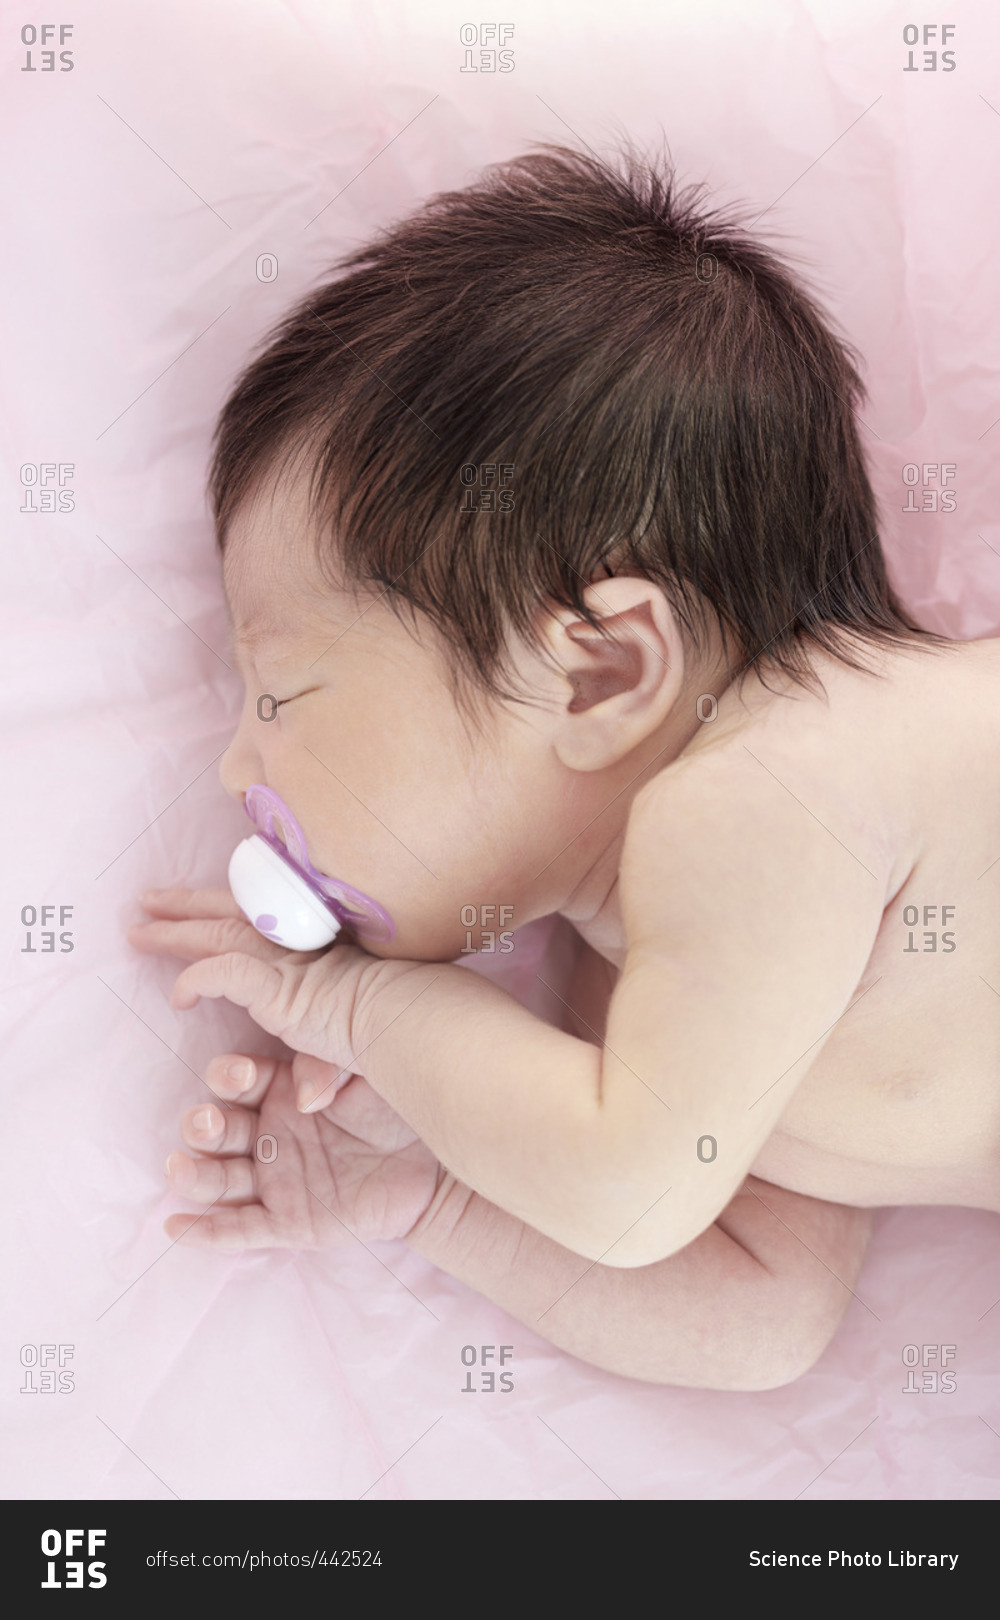 Newborn baby girl with dummy in mouth